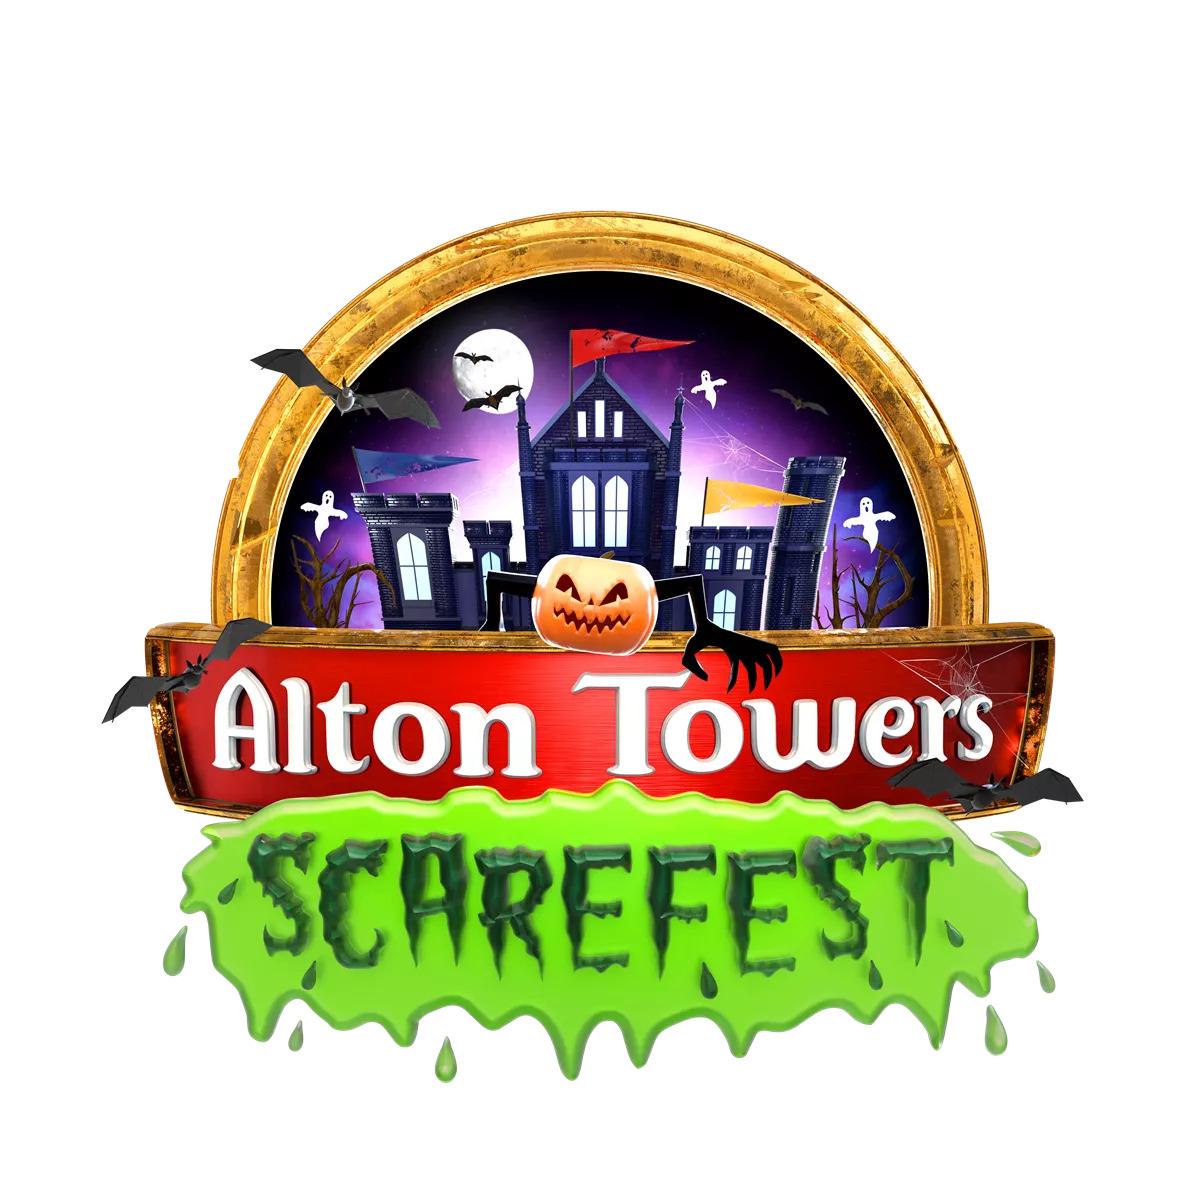 Alton Tower will use the map for its Scarefest and Ultimate Fireworks Spectacular events / Alton Towers/Merlin